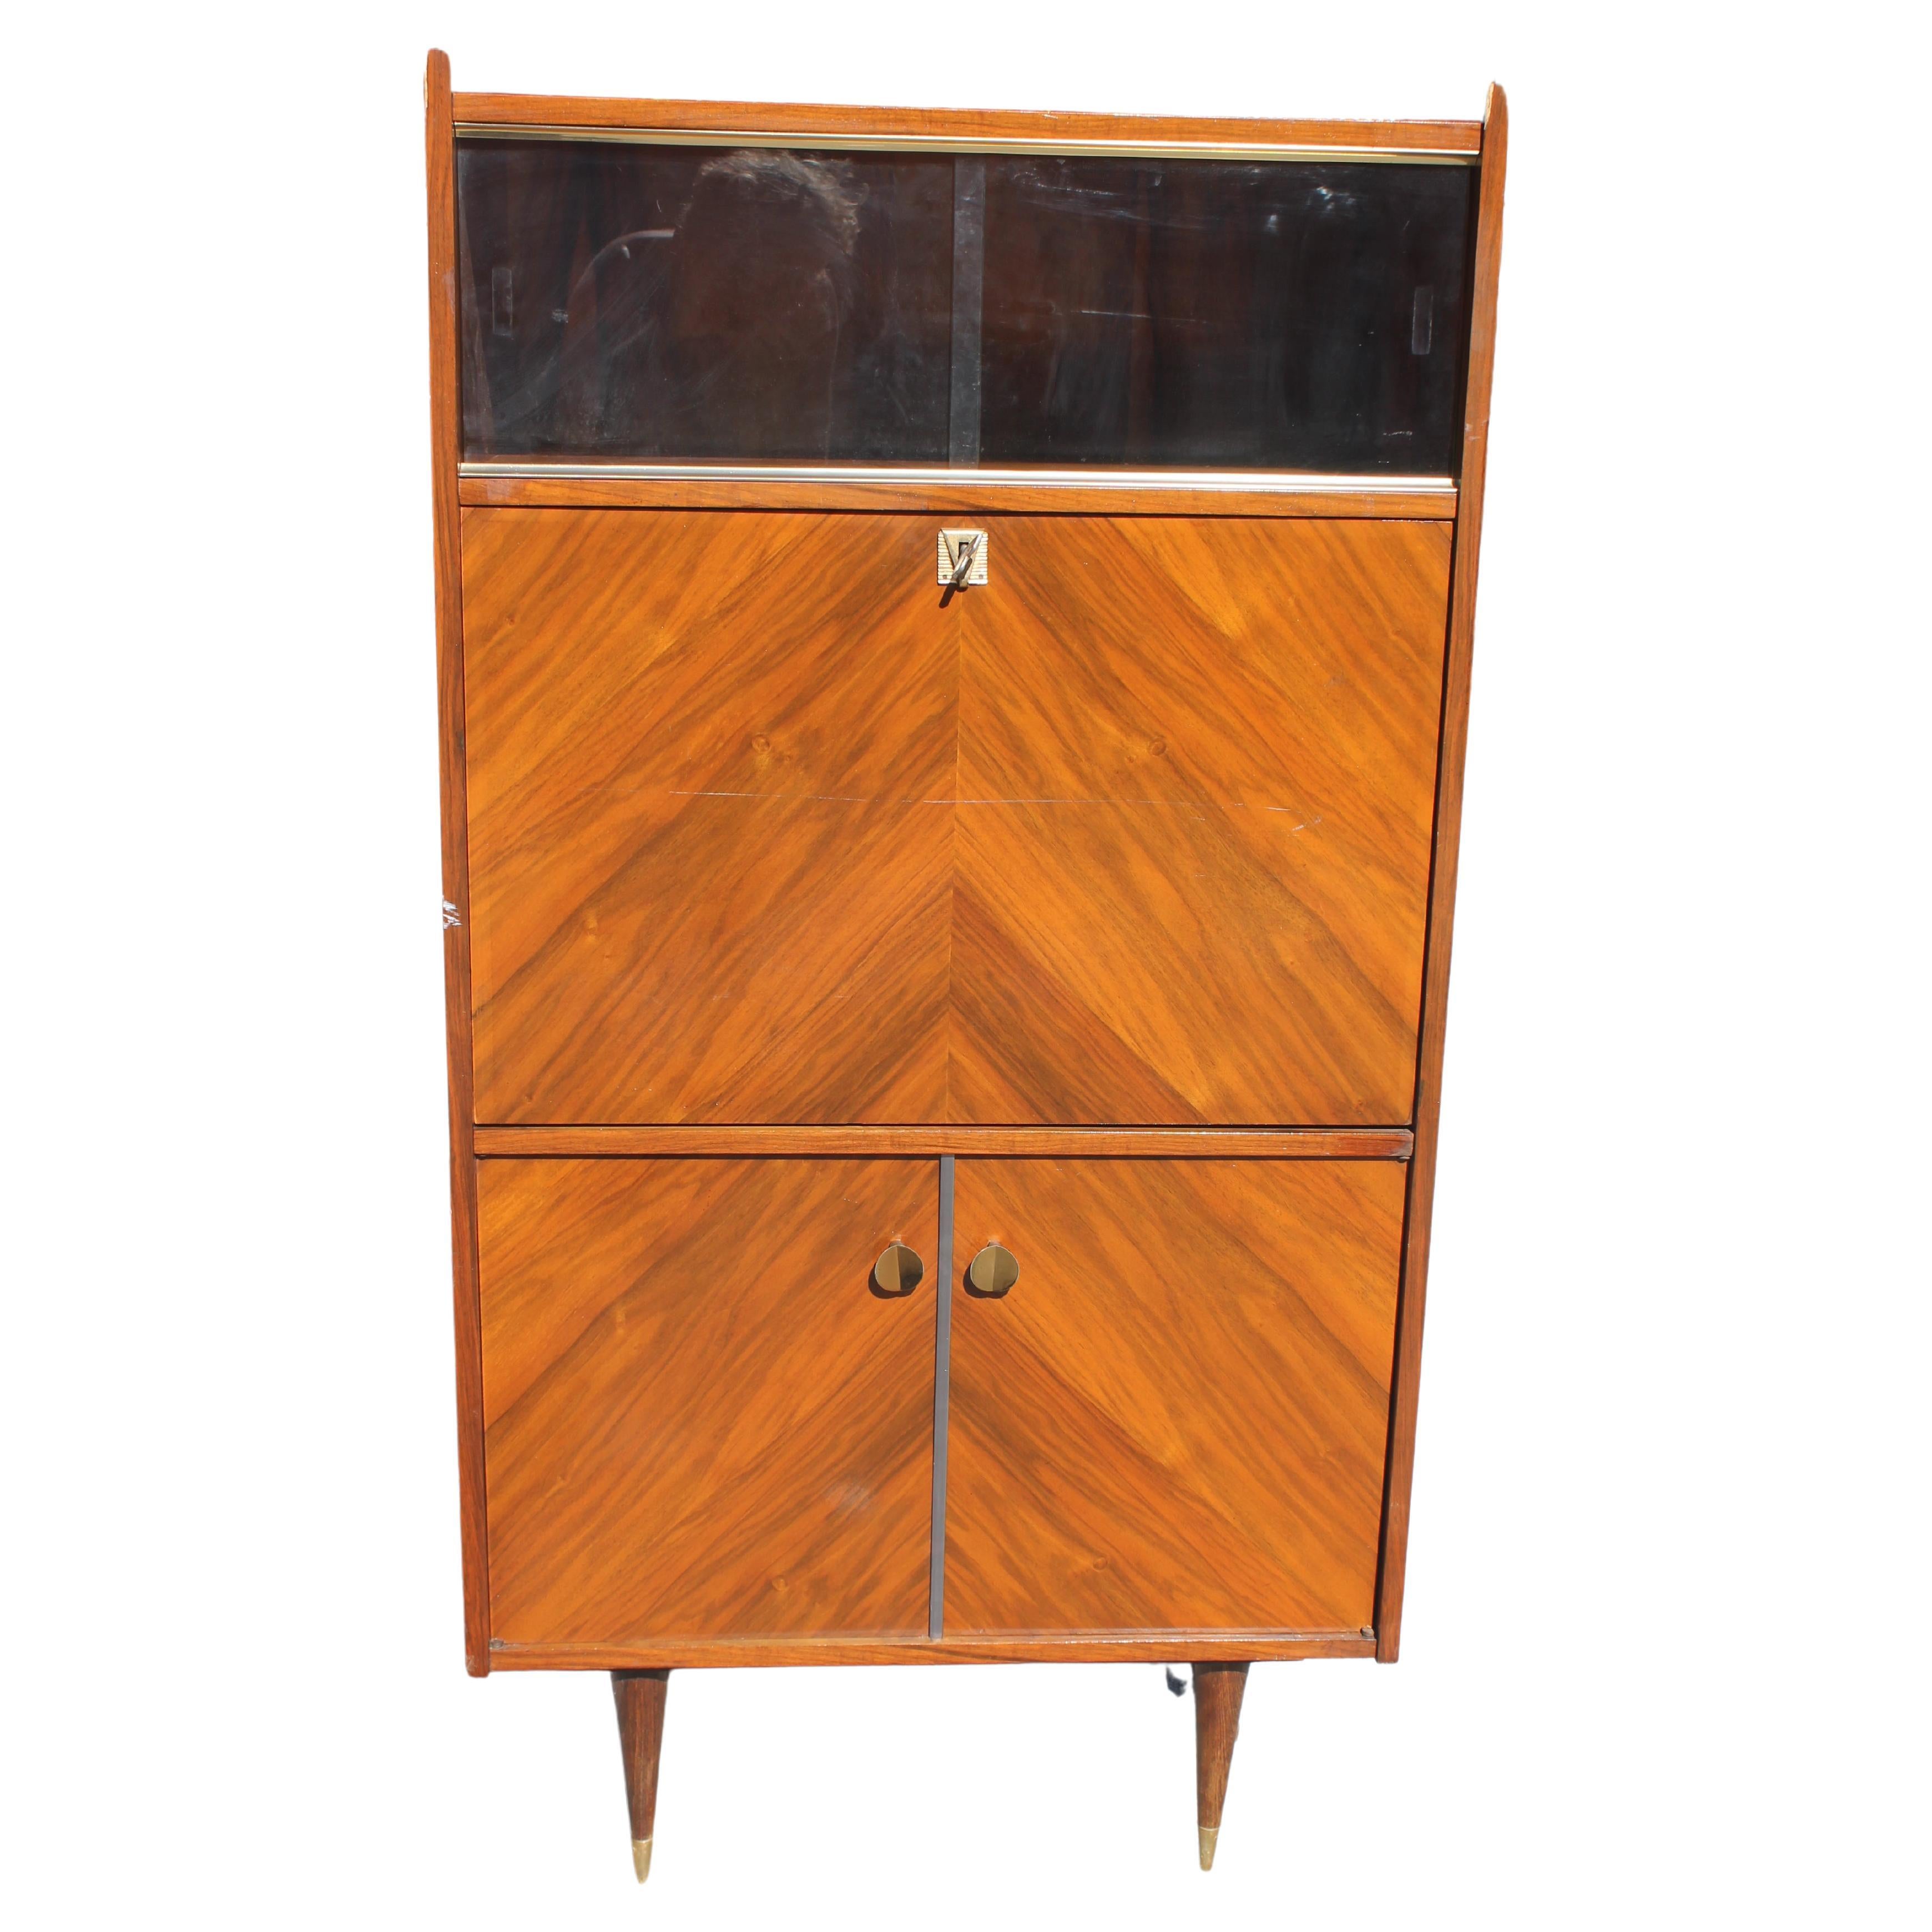 c1940's French Art Deco Exotic Rosewood Secretary Cabinet. Top glass enclosed display area. Interior with special sections for desk needs. Rare form.